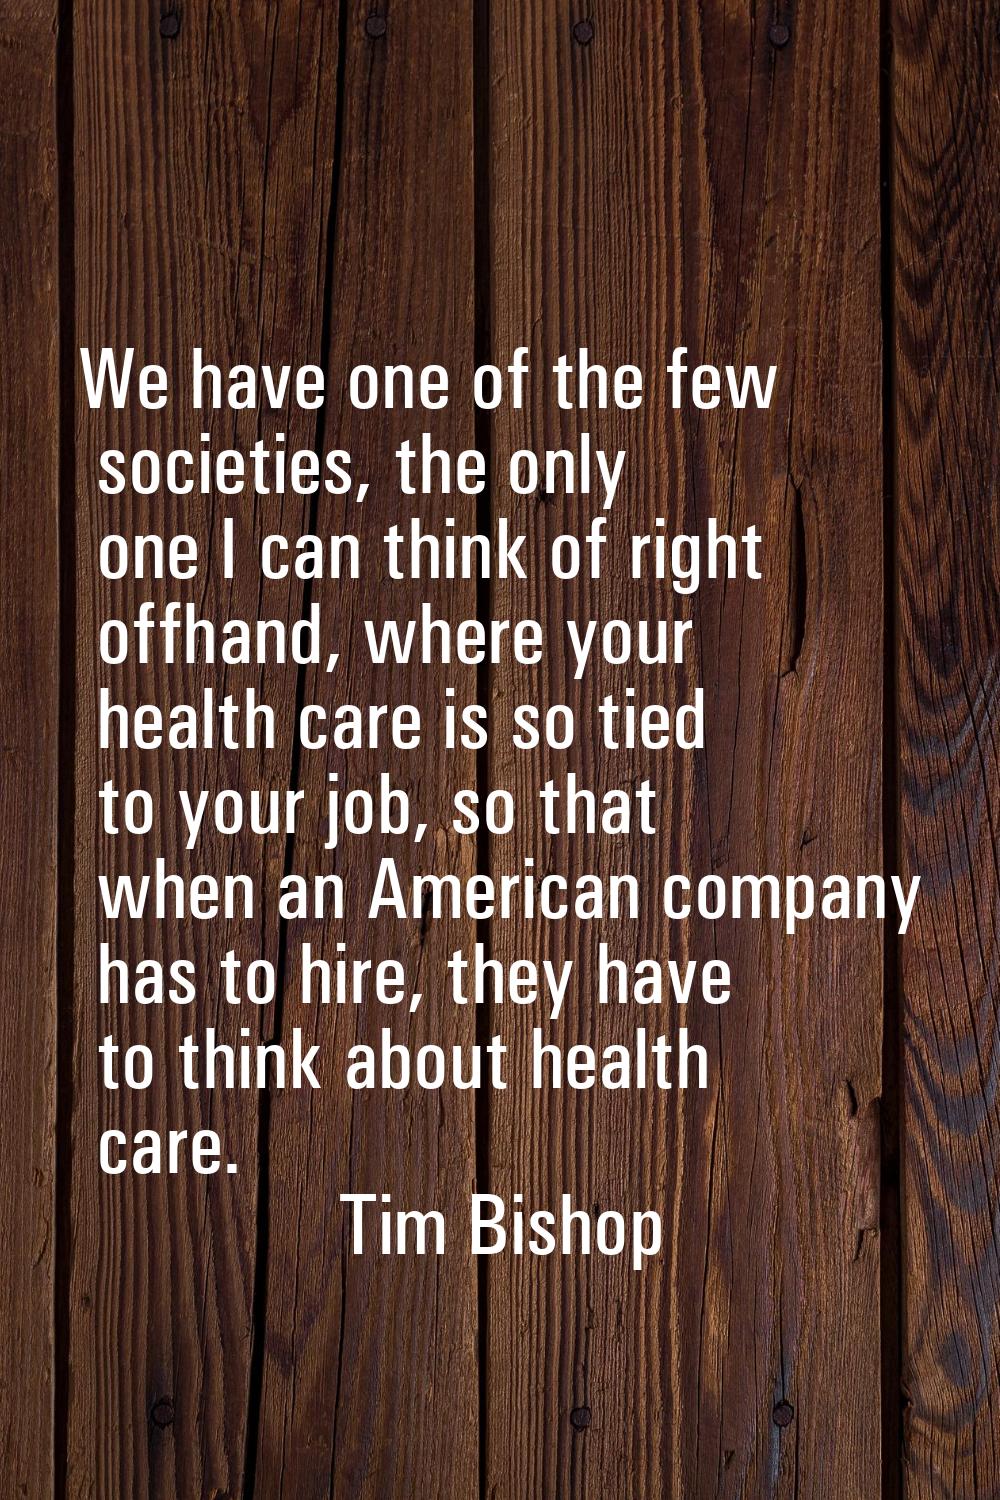 We have one of the few societies, the only one I can think of right offhand, where your health care